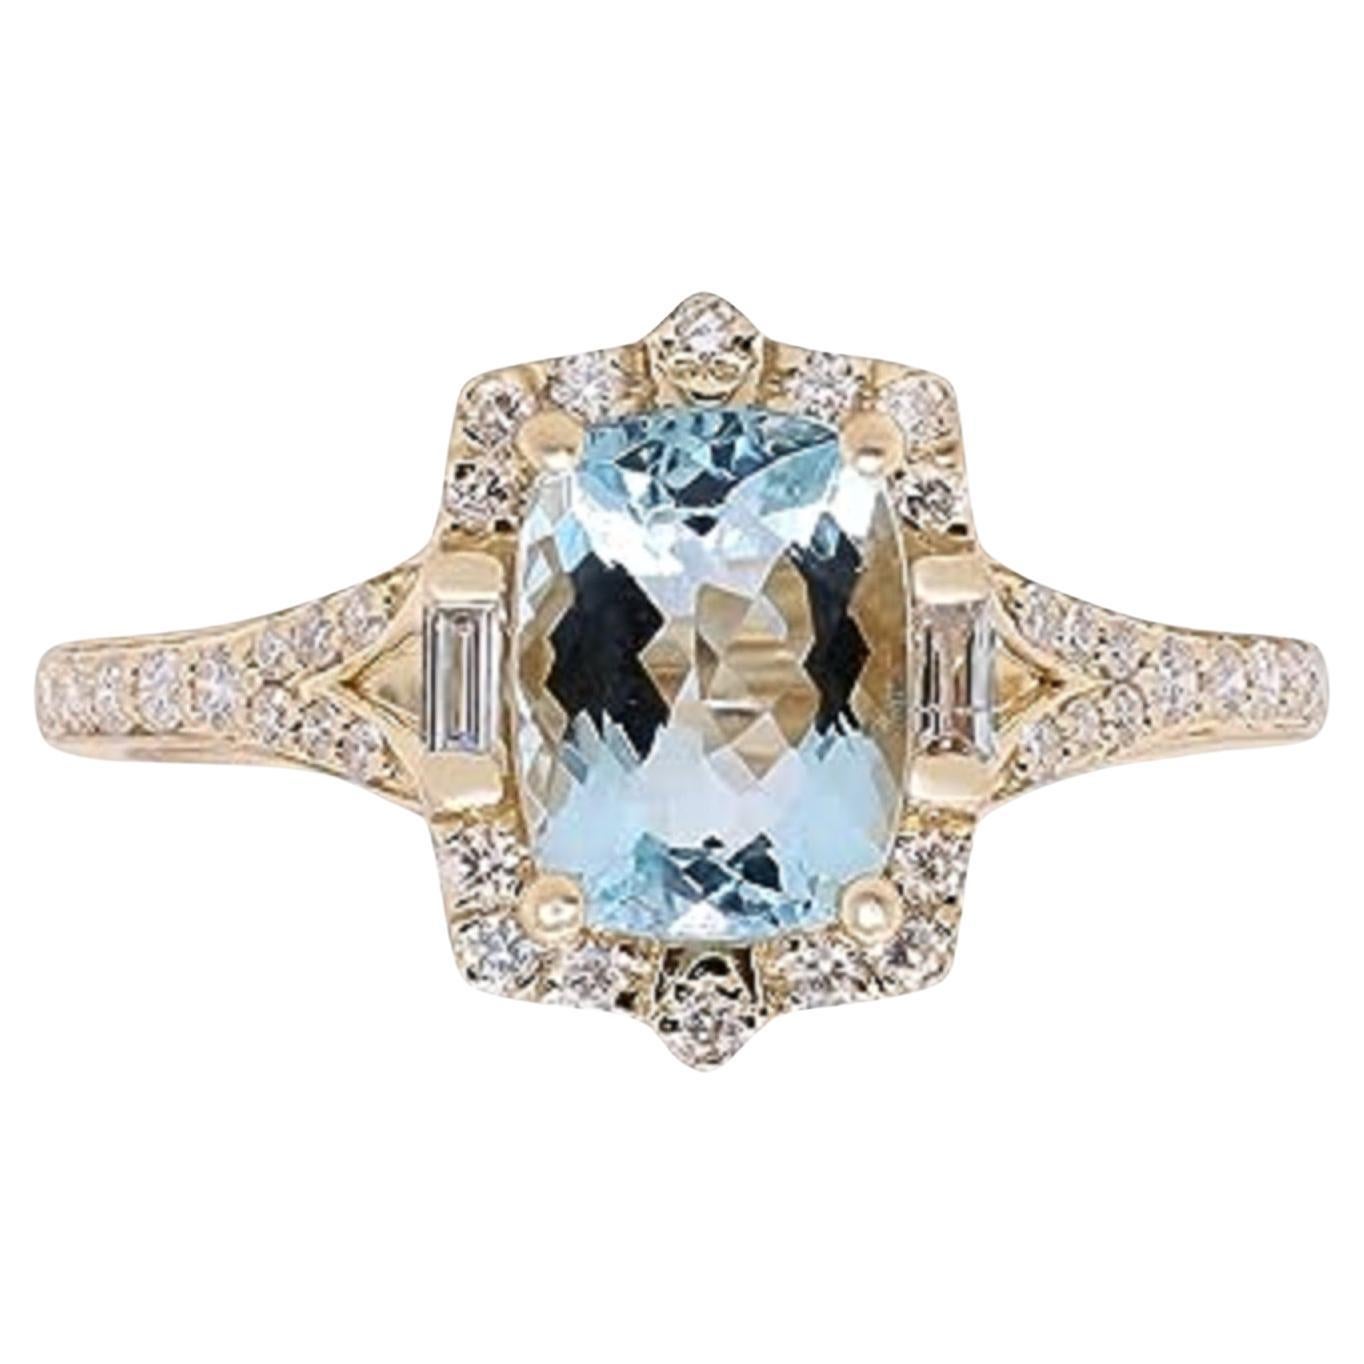 Decorate yourself in elegance with this Ring is crafted from 14-karat Yellow Gold by Gin & Grace. This Ring is made up of 6*8 Cushion-cut Aquamarine (1 Pcs) 1.32 carat Baguette (2 Pcs) 0.04 carat and Round-cut White Diamond (36 Pcs) 0.22 carat. This